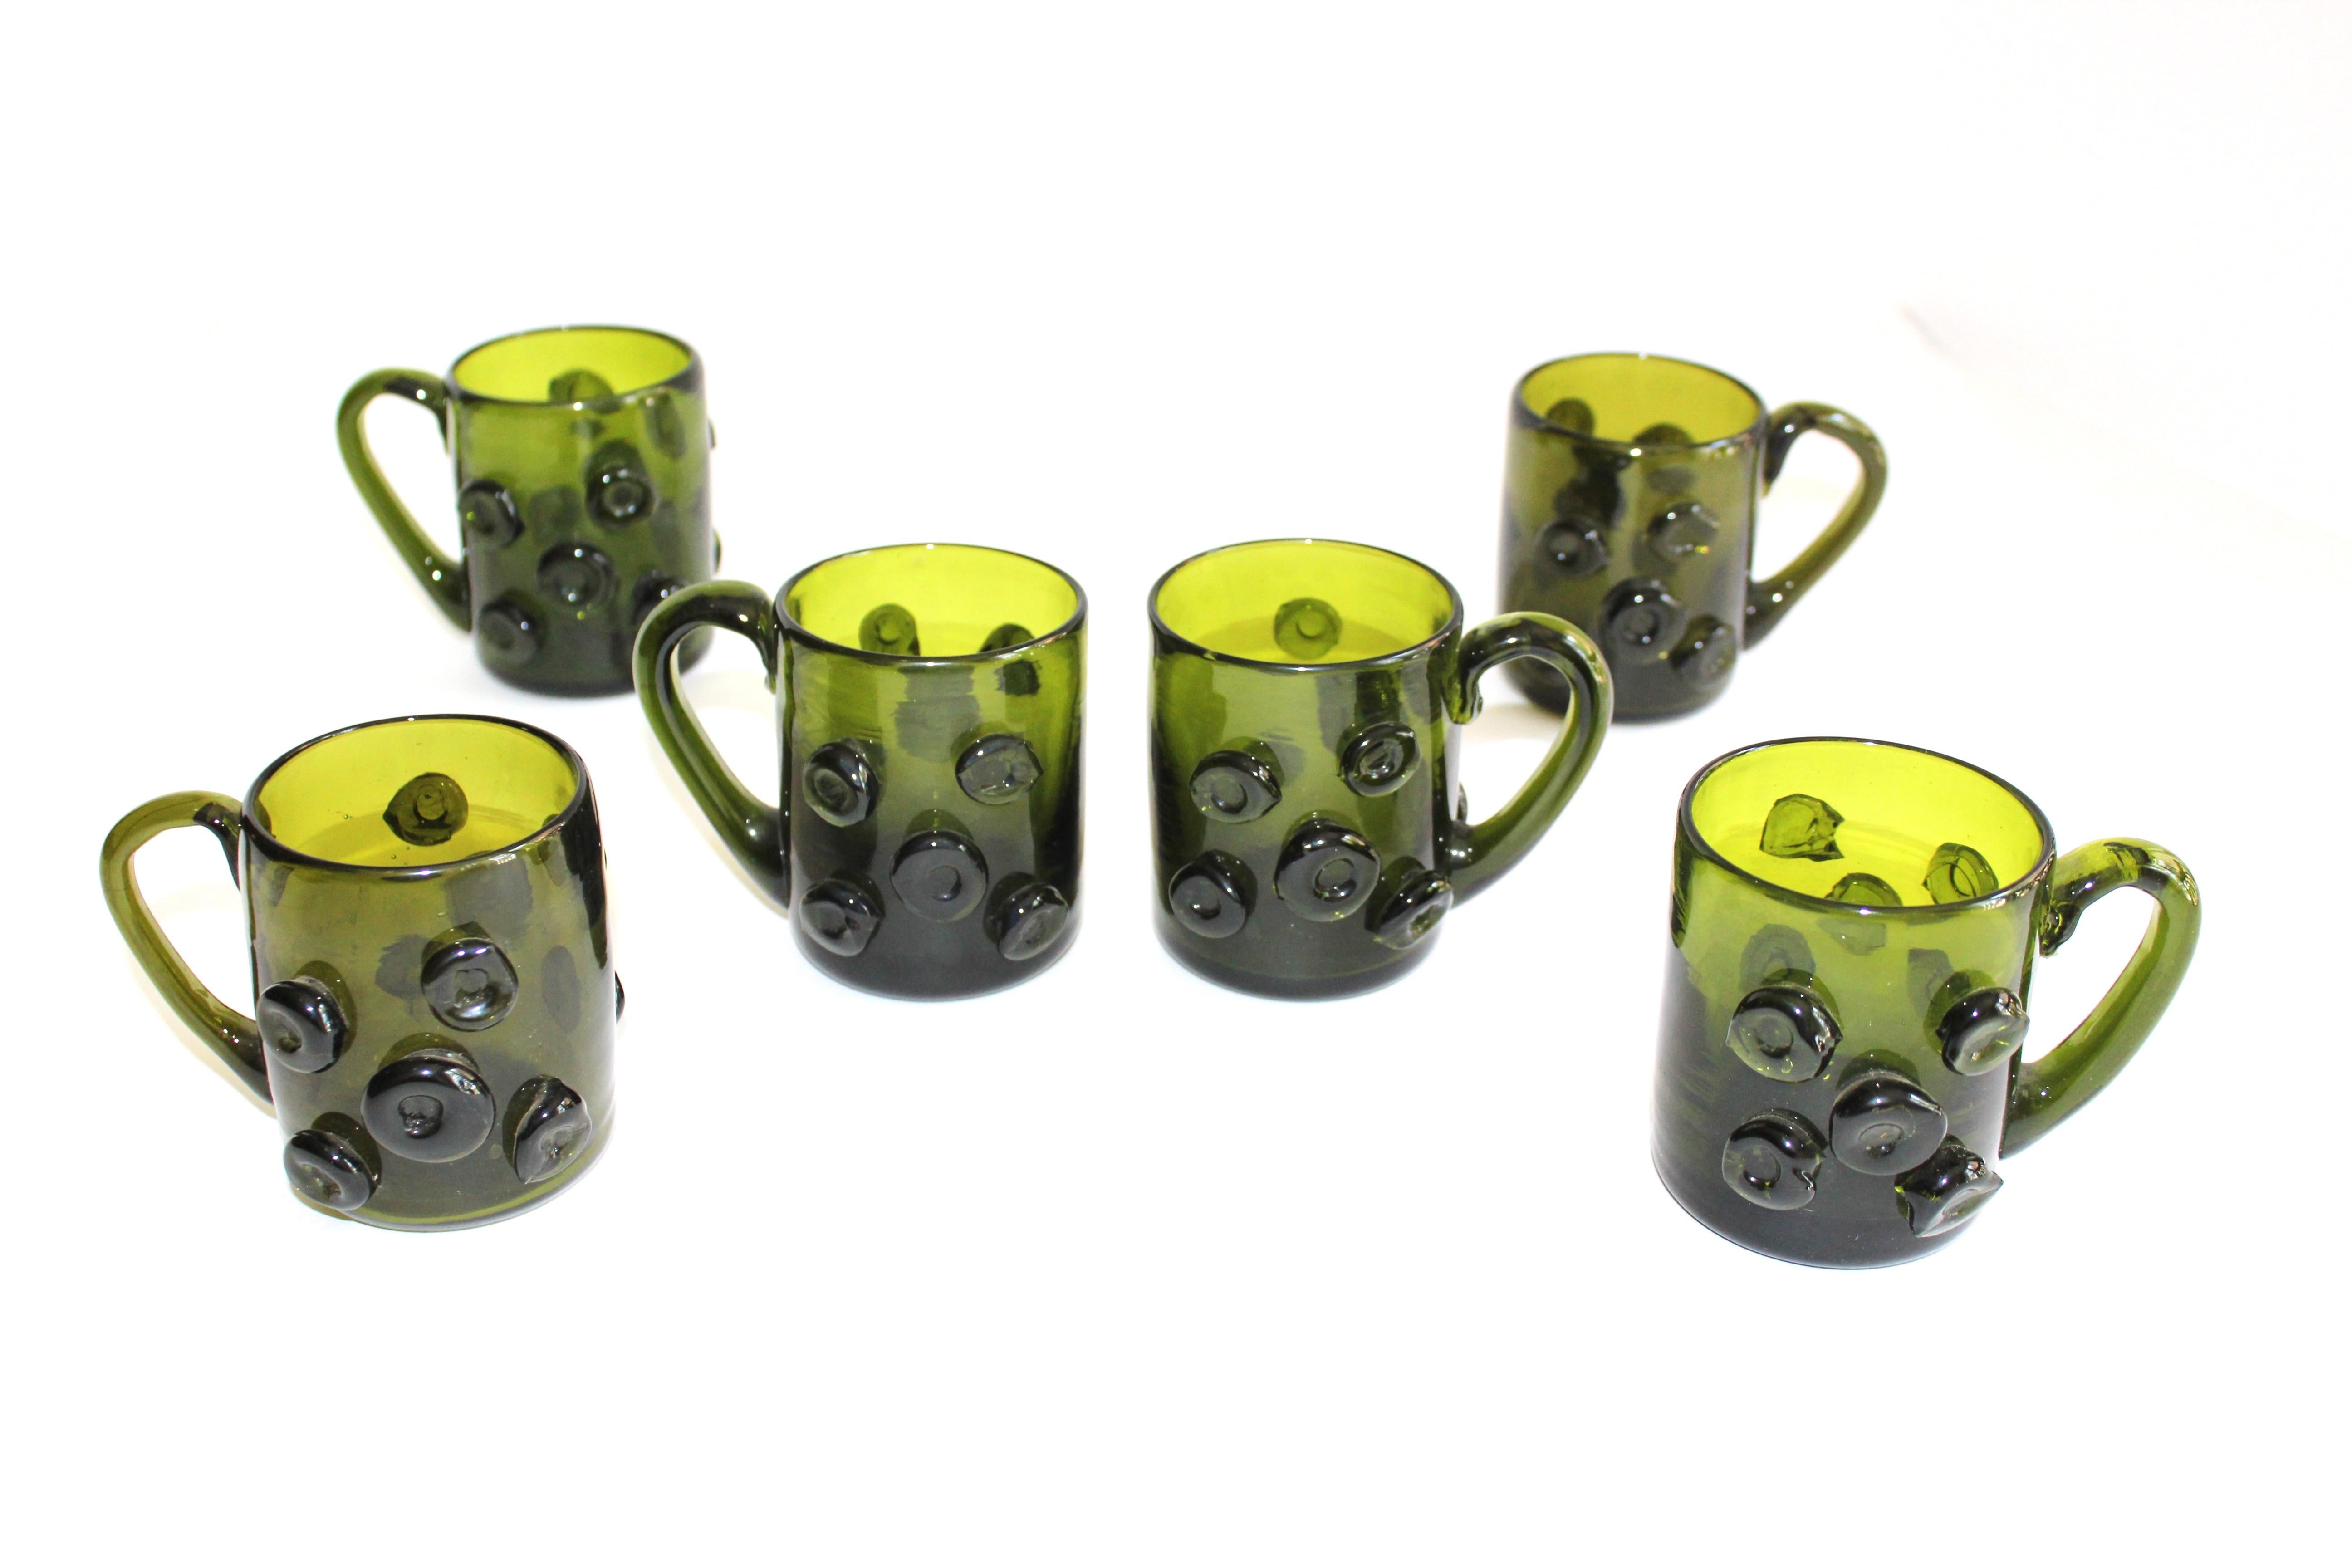 Set of six charming Mid-Century Modern handblown glass mugs in beautiful emerald green. Large demitasse size perfect for espresso or liqueurs. The glasses feature circular prunts along the exterior, as well as Fine sculpted glass handles.